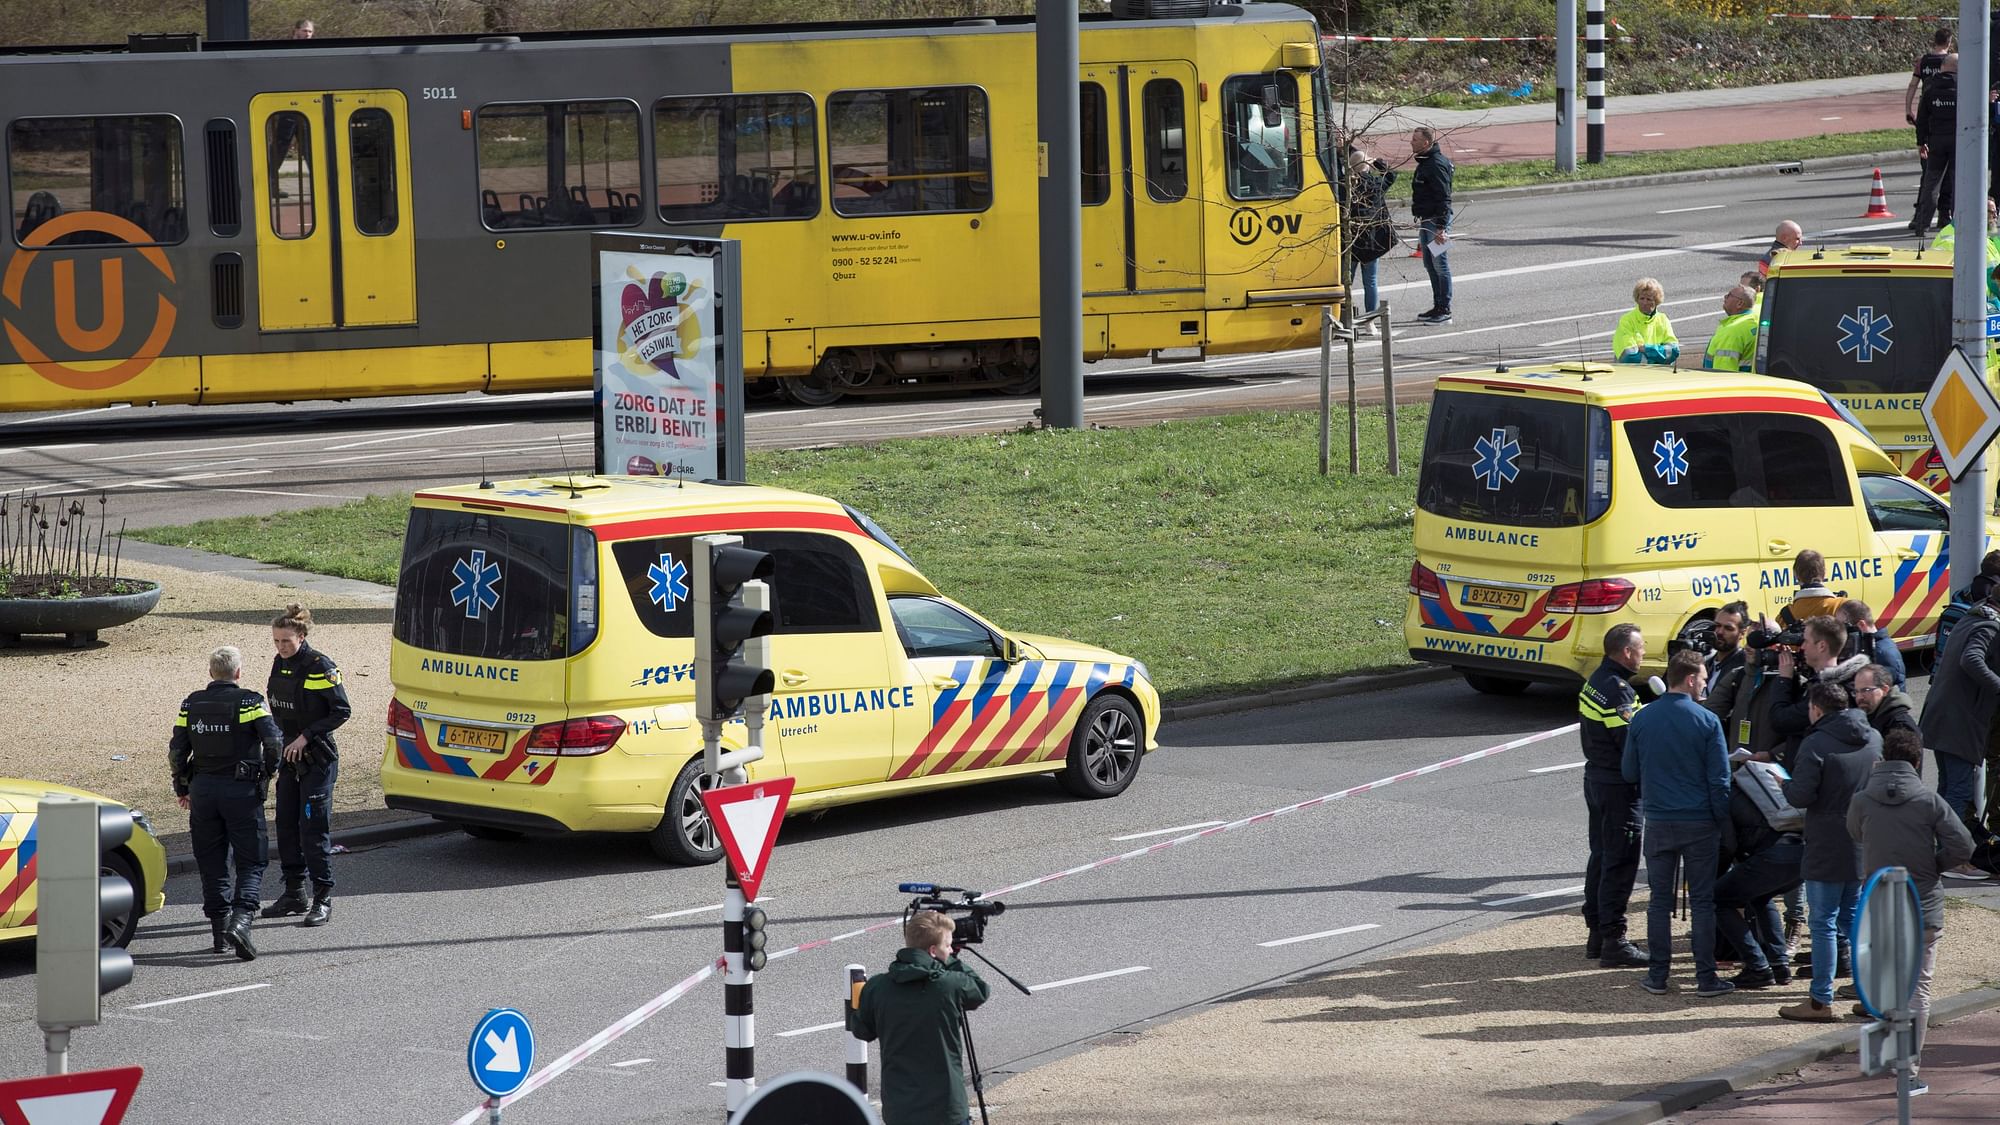 Emergency services attend the scene of a shooting in Utrecht, Netherlands on Monday, 18 March.